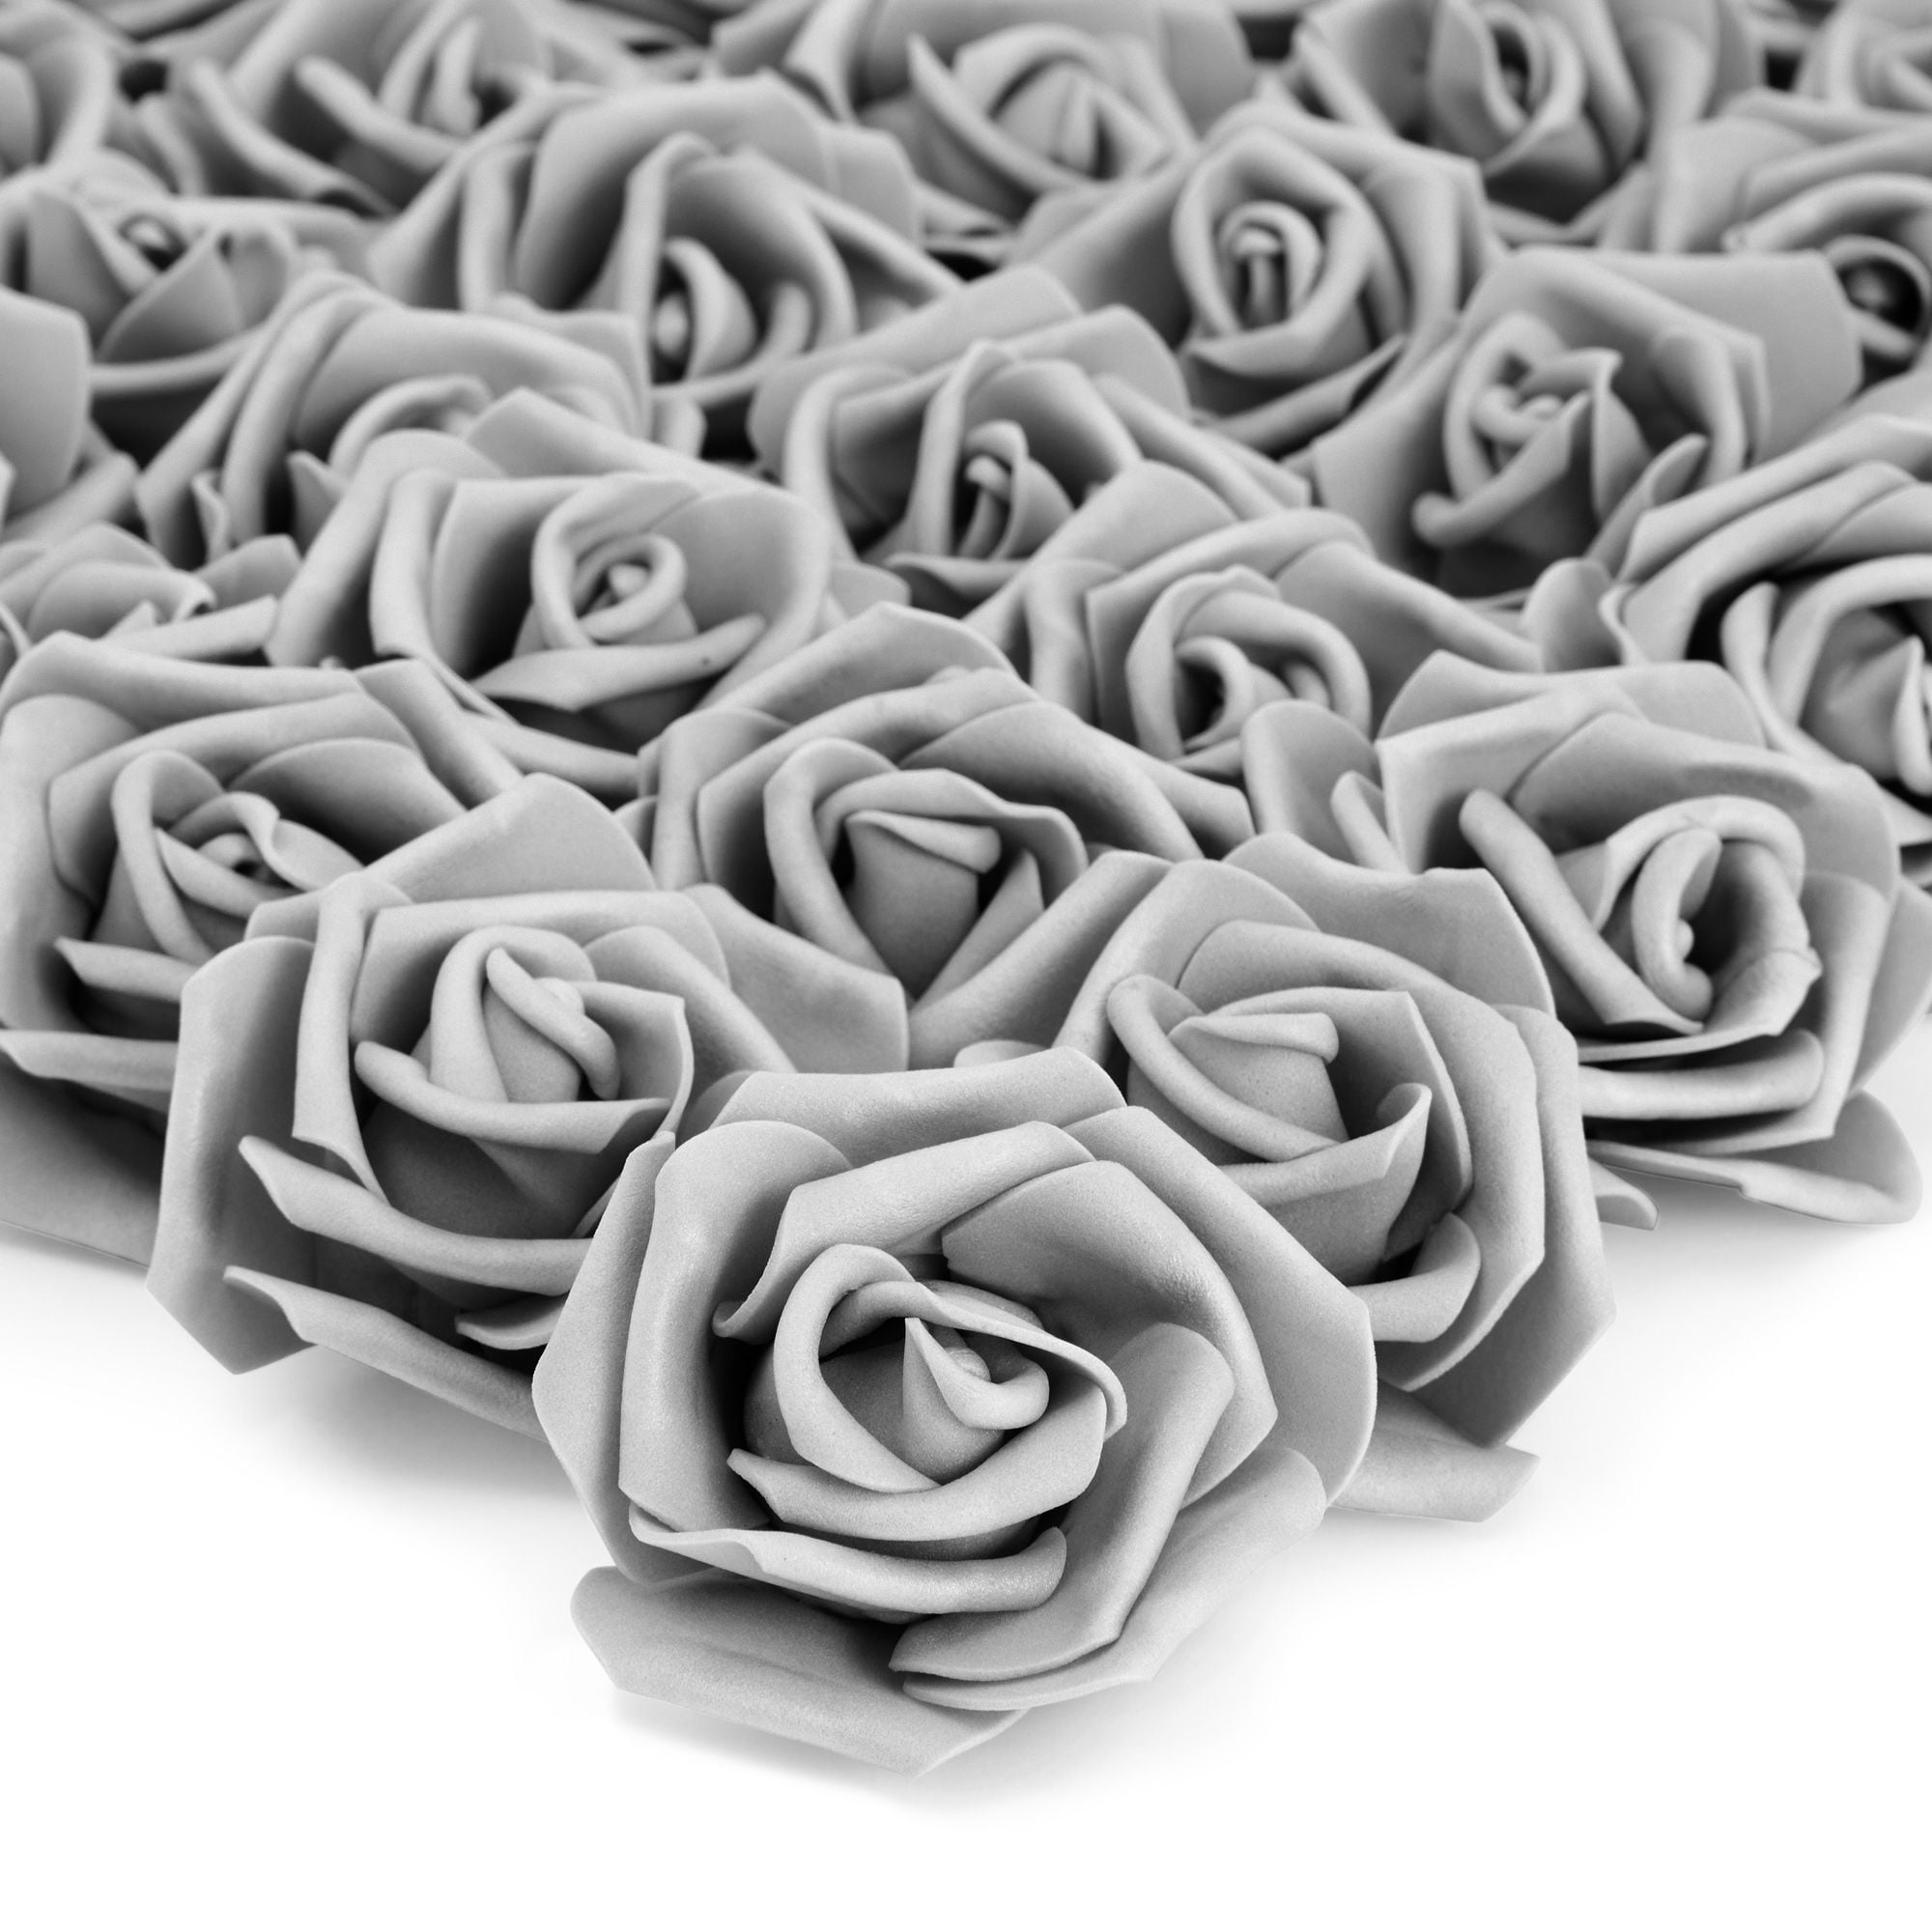 100 Pack 3 Grey Rose Fake Flower Heads for DIY Crafts, Weddings and Decor - Gray